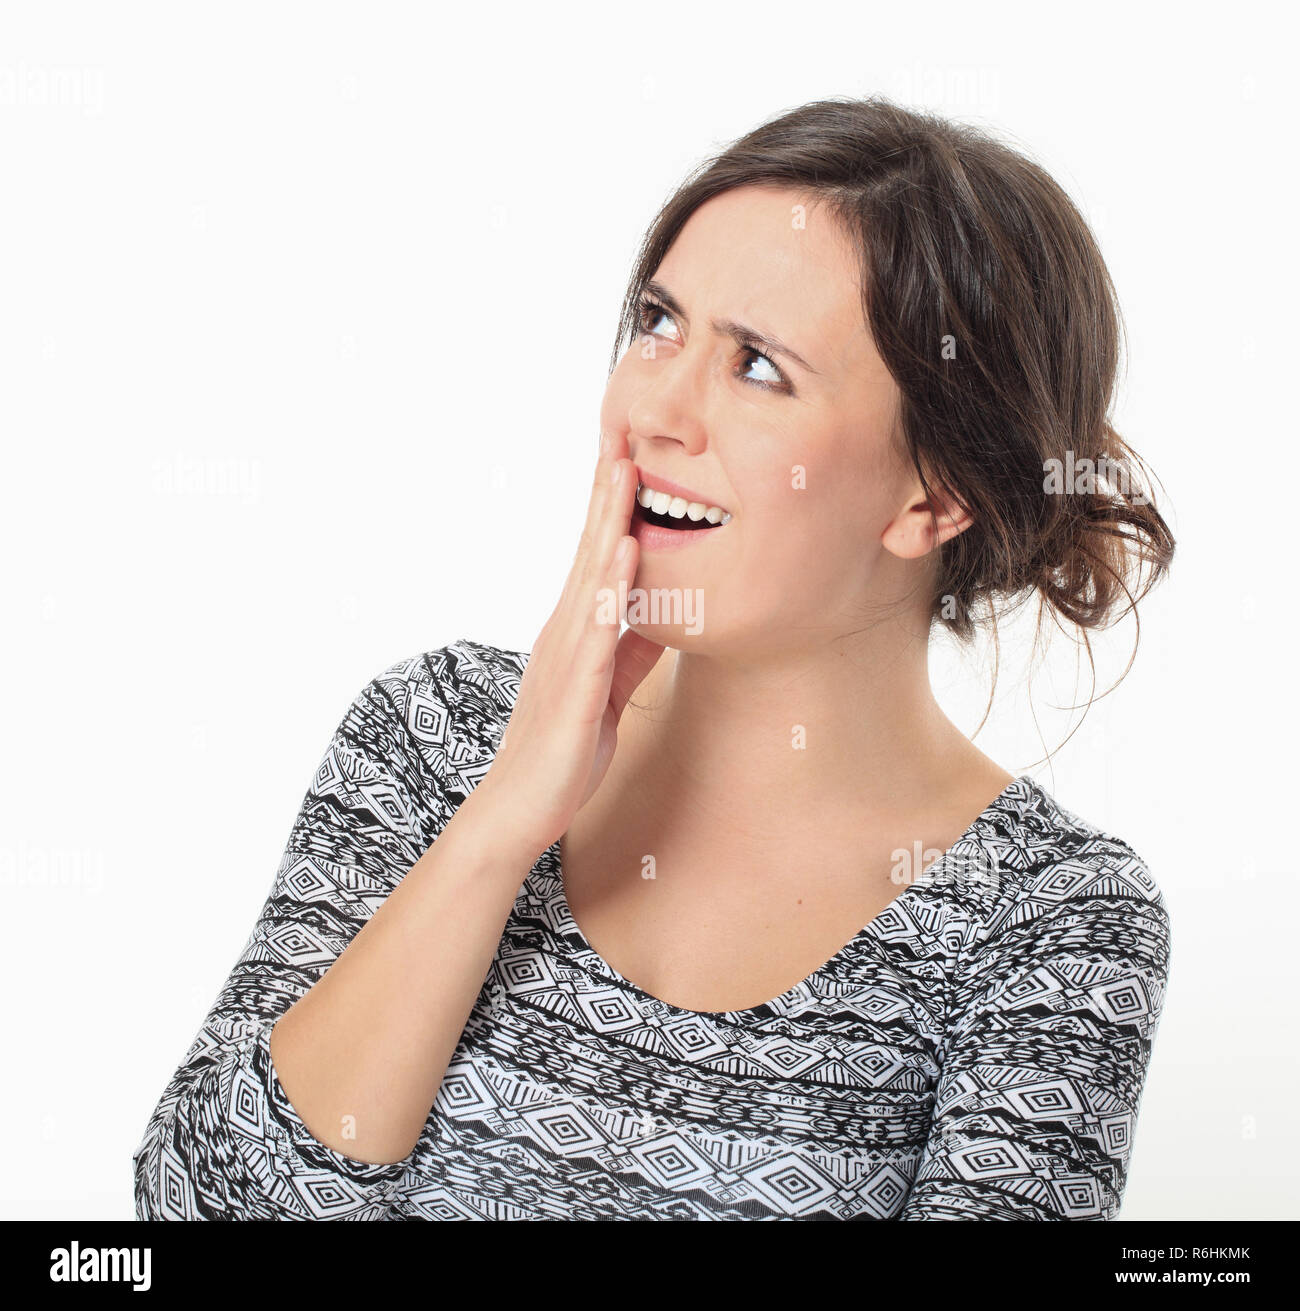 Excited young woman keeping her arm to mouth Stock Photo